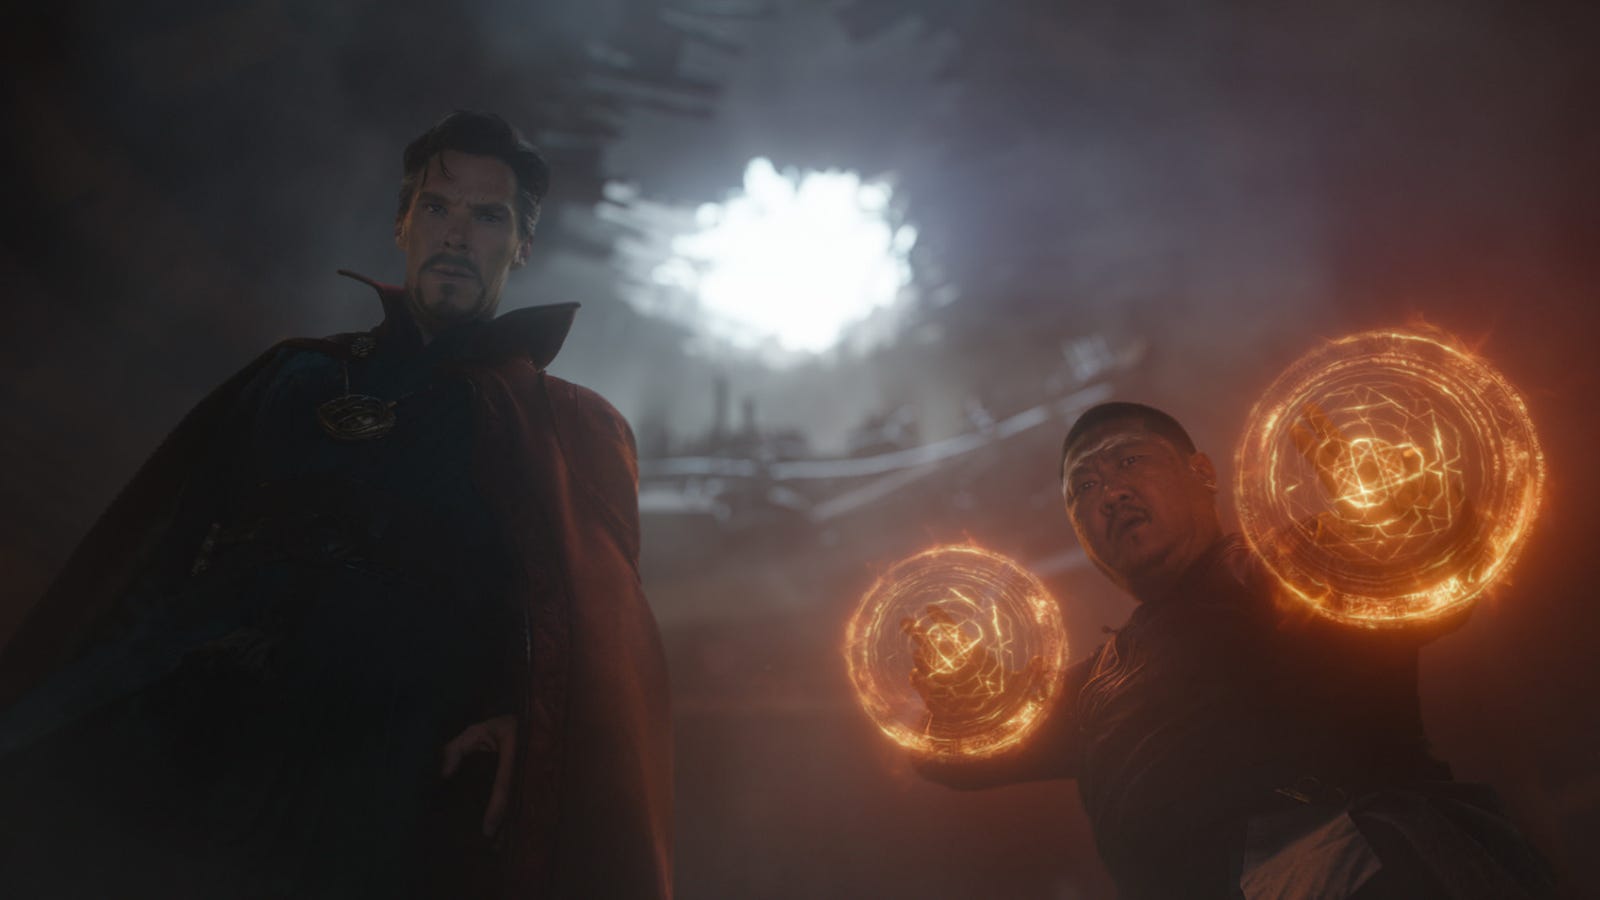 Doctor Strange in the Multiverse of M downloading